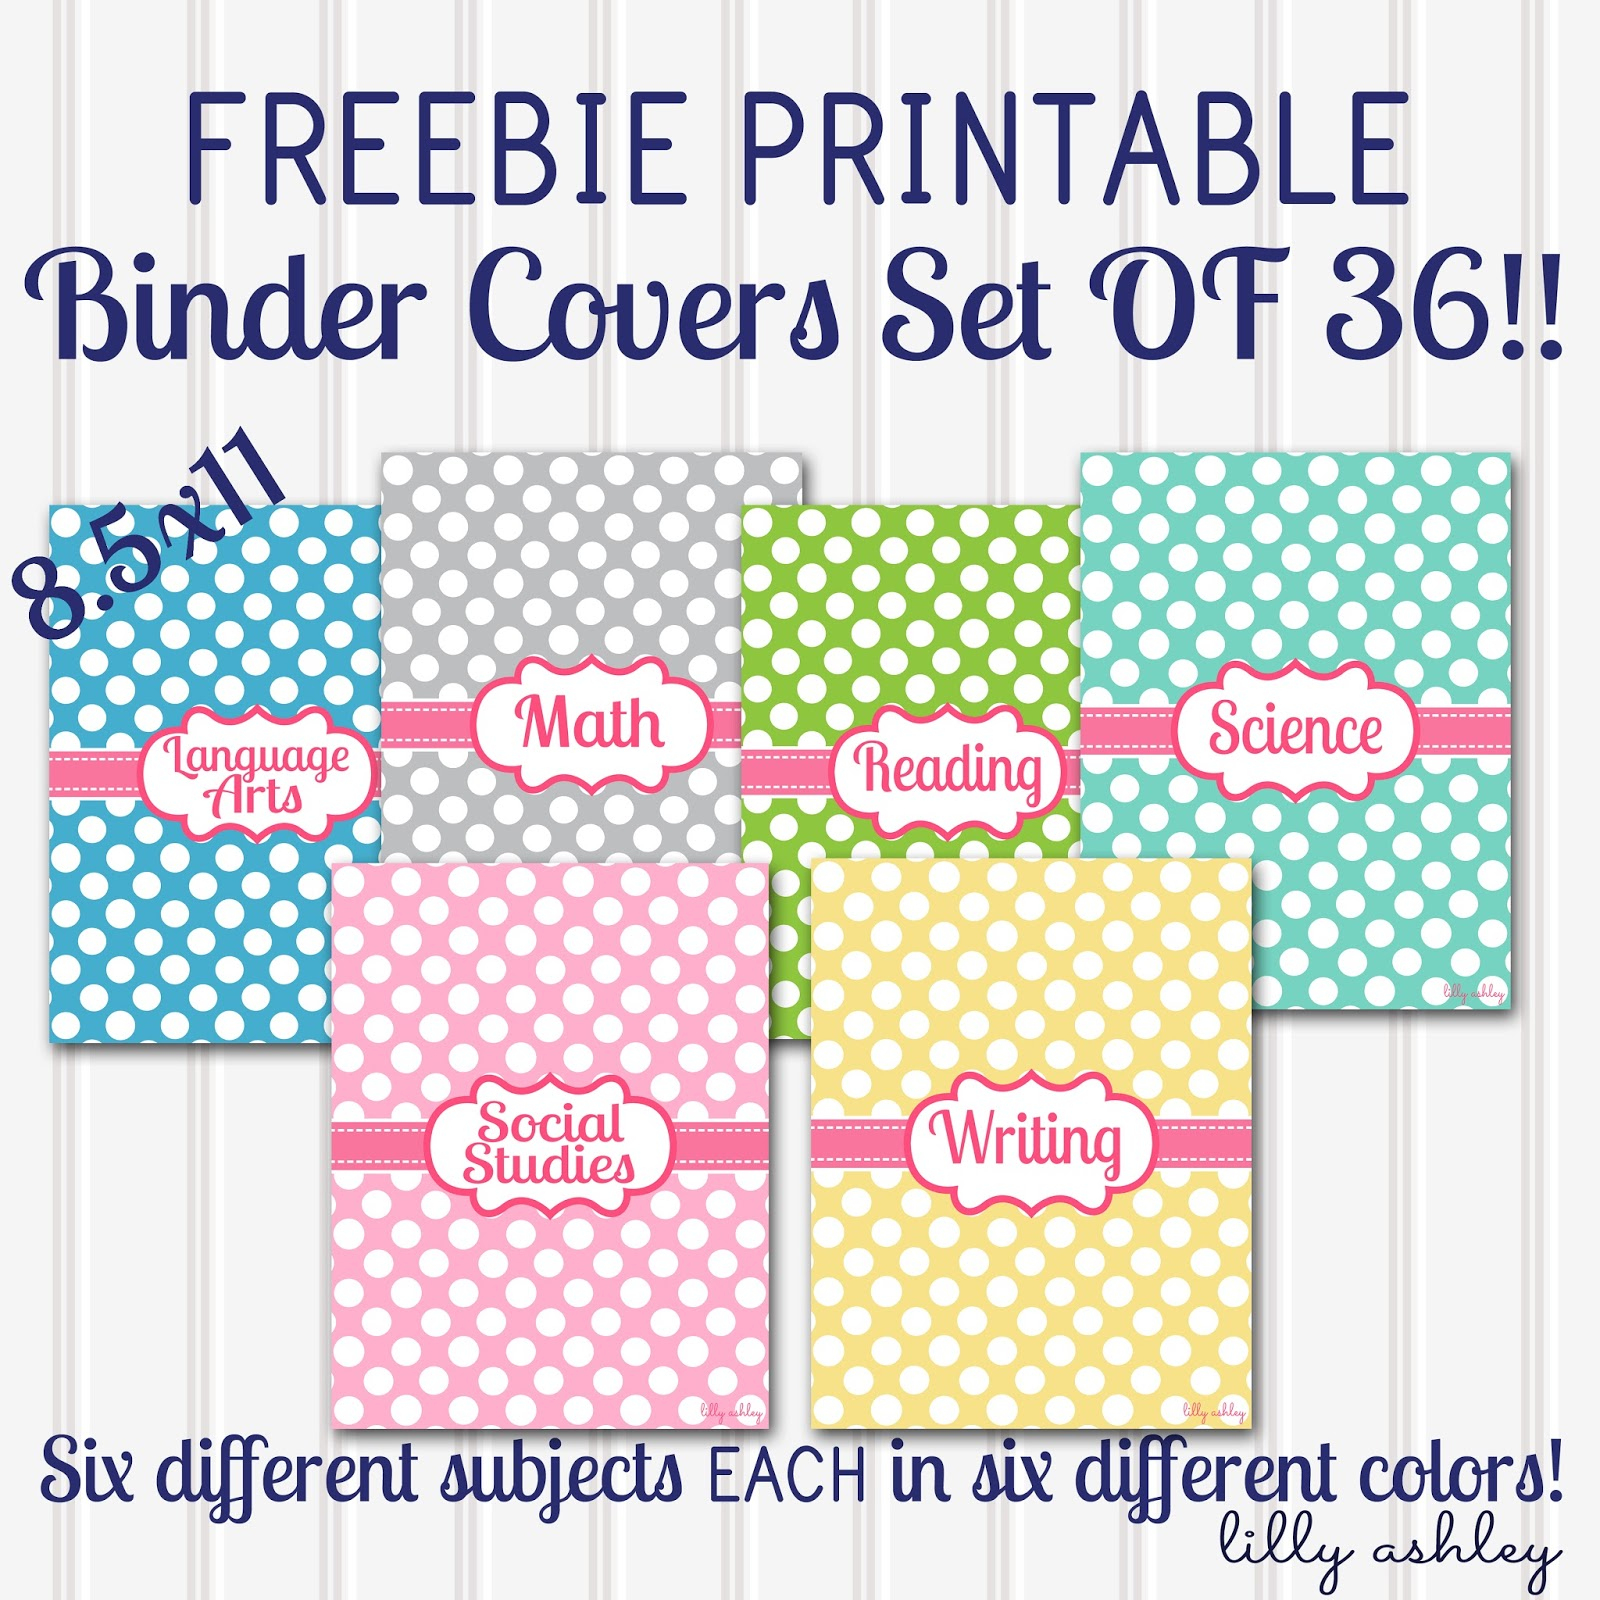 Make It Createlillyashleyfreebie Downloads: Back To School - Free Printable Binder Covers And Spines